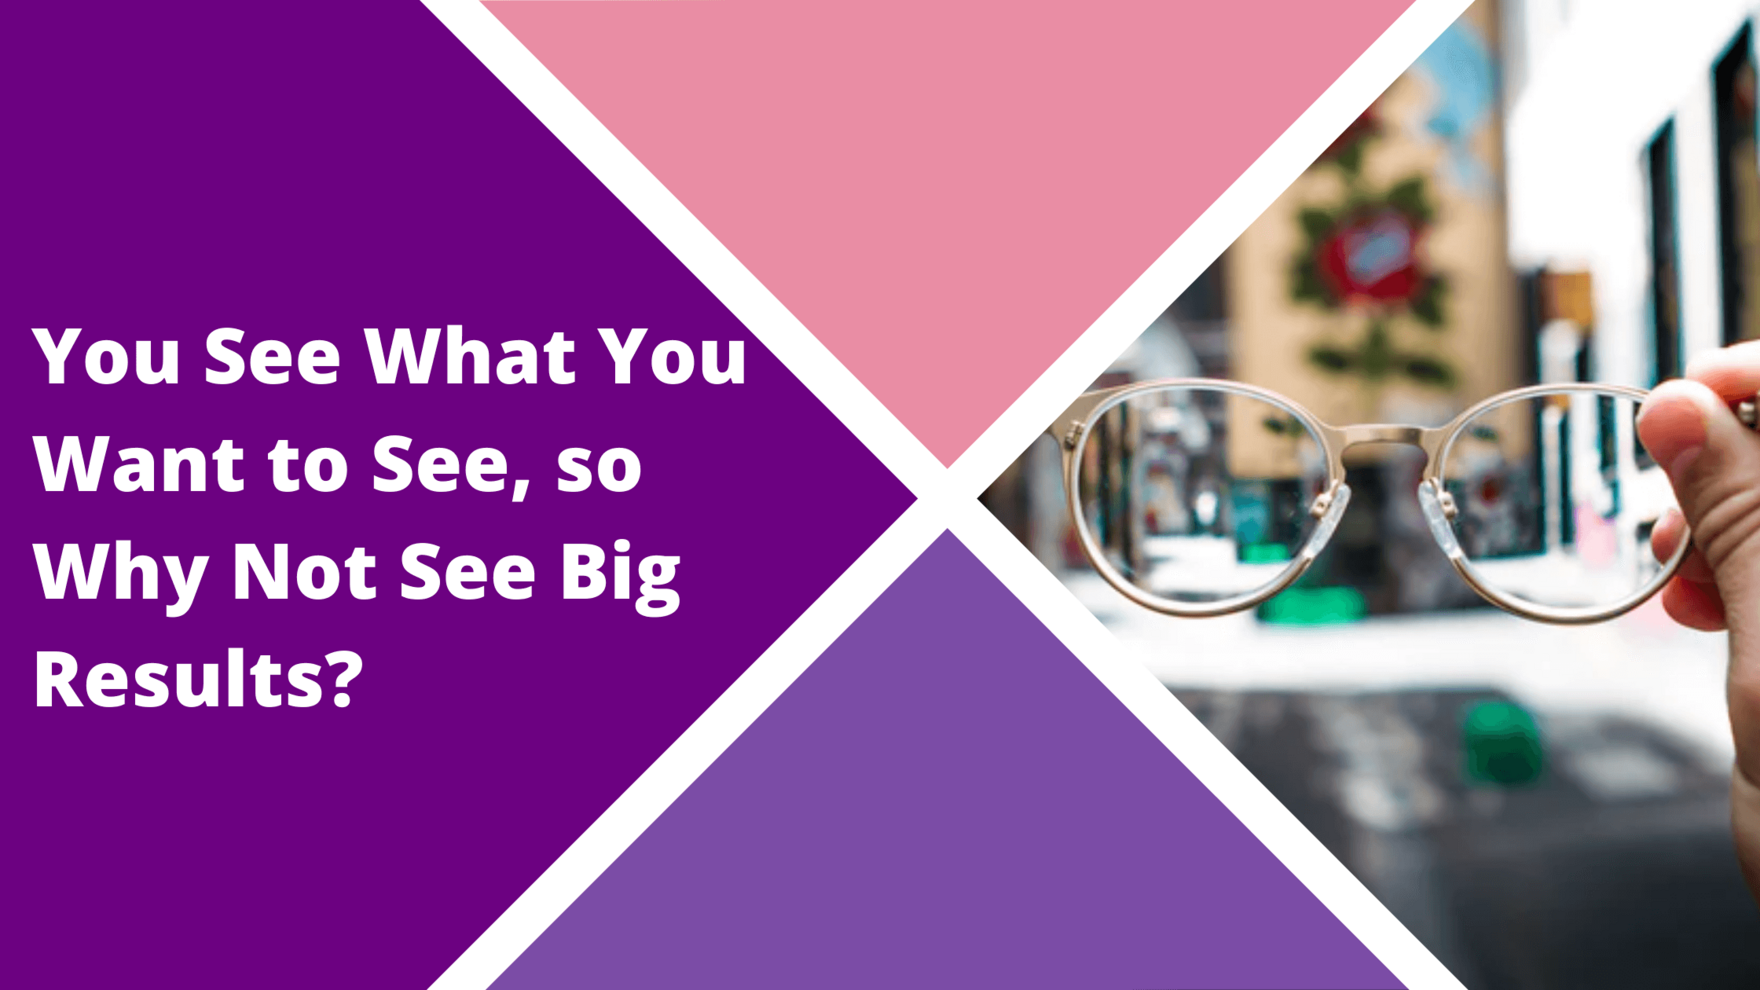 Think Big Blog - You See What You Want to See, so Why Not See Big Results